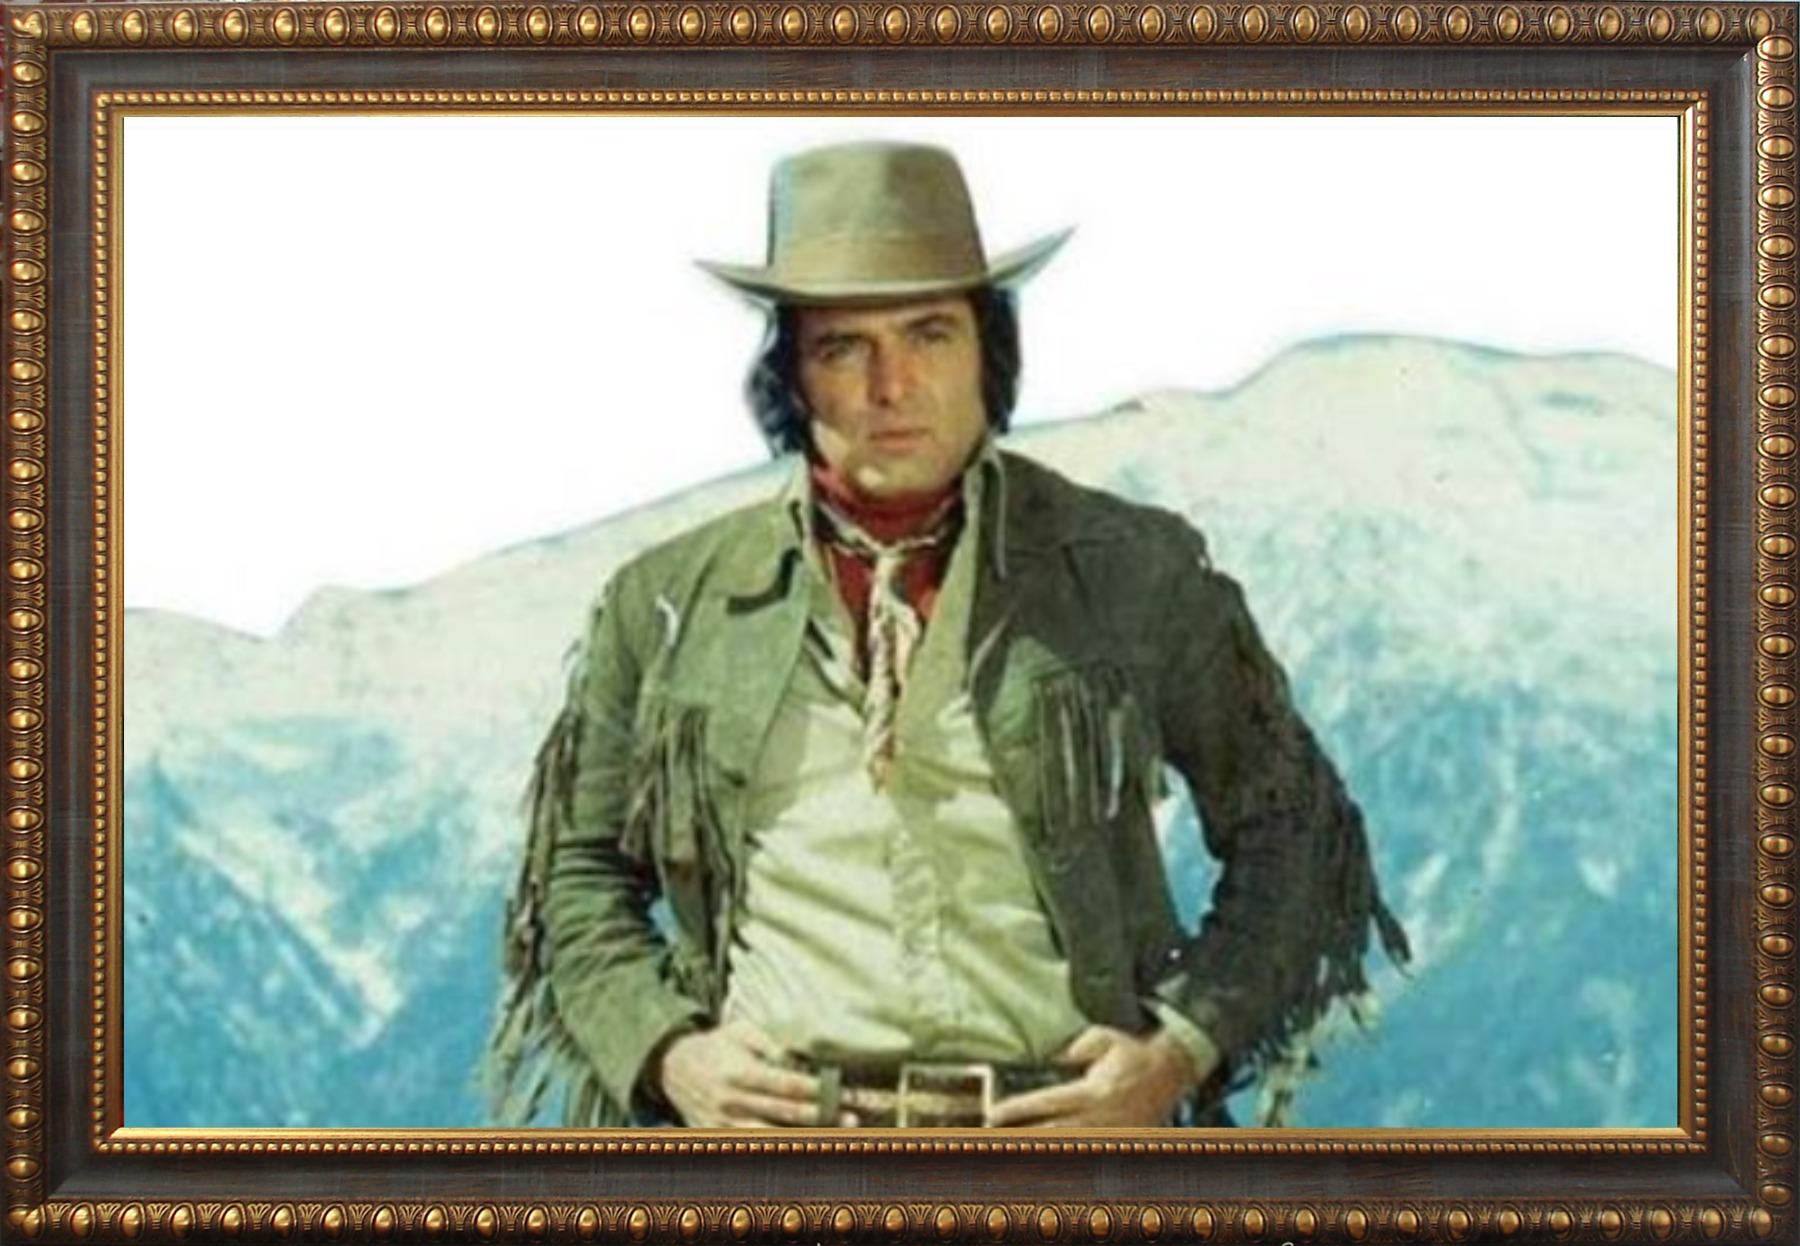 You are currently viewing “Clint Eastwood of India -Dashing Feroz Khan”.